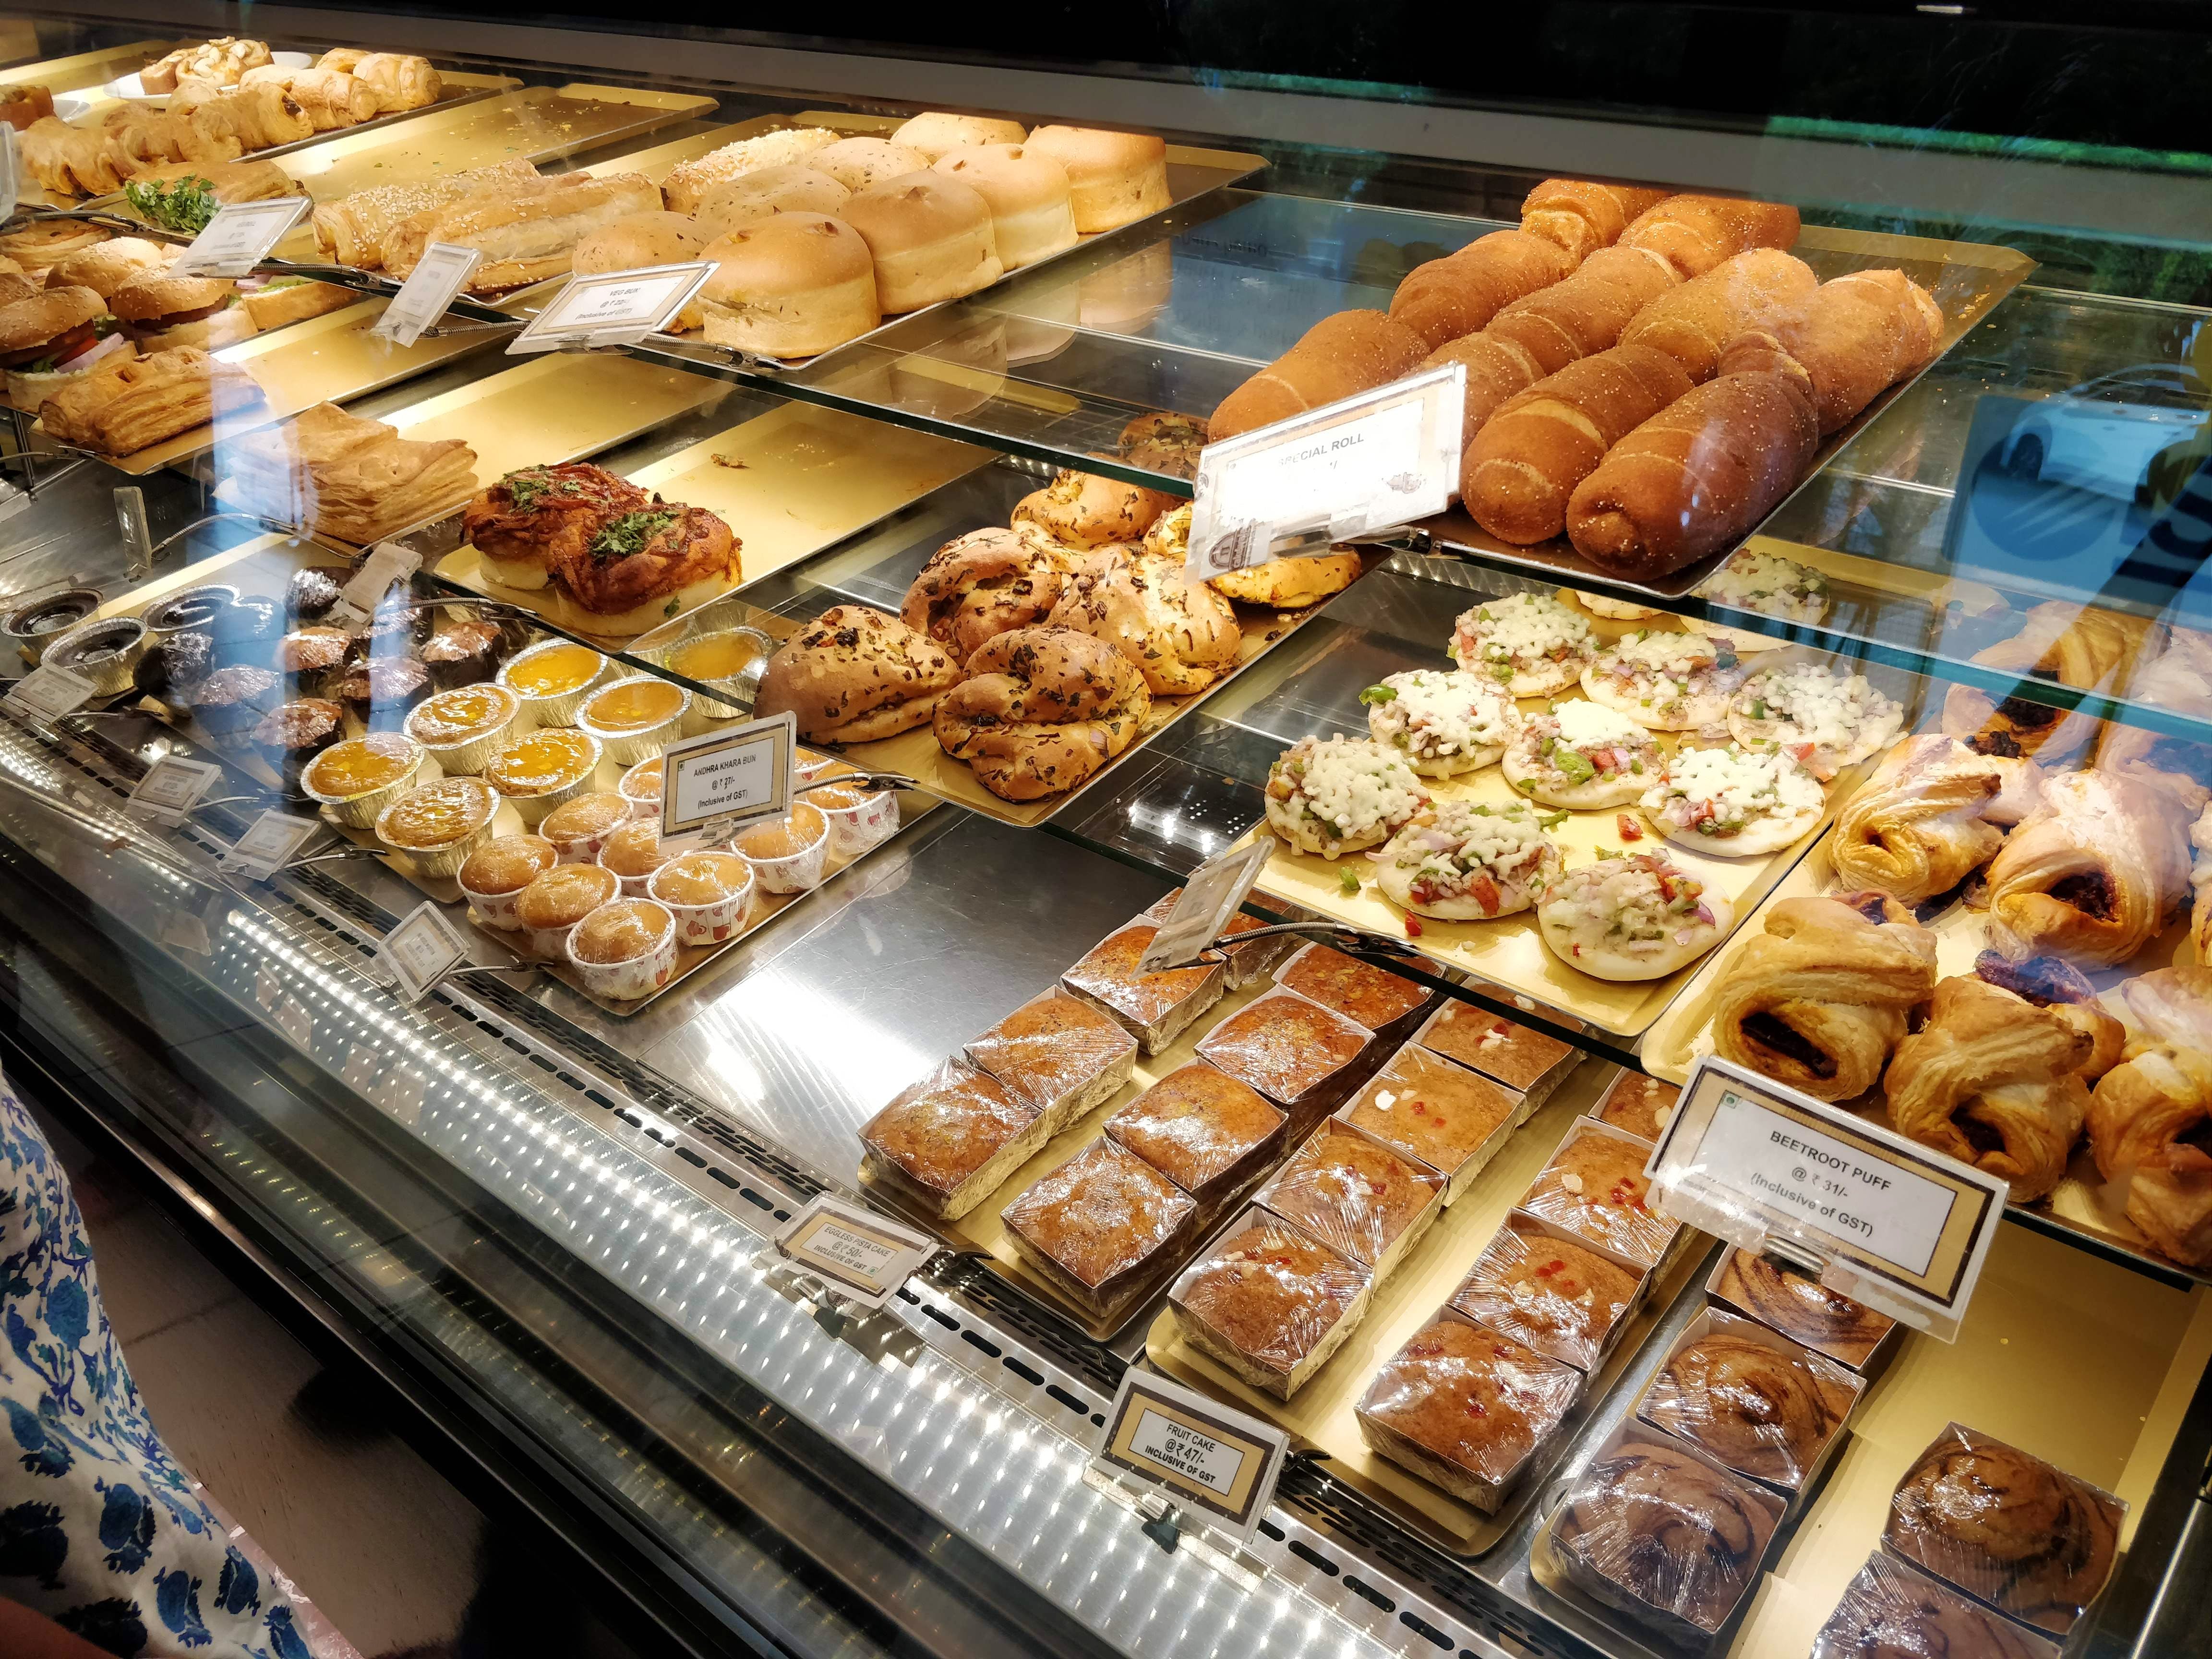 Food,Cuisine,Dish,Bakery,Pâtisserie,Delicacy,Danish pastry,Pastry,Ingredient,Display case